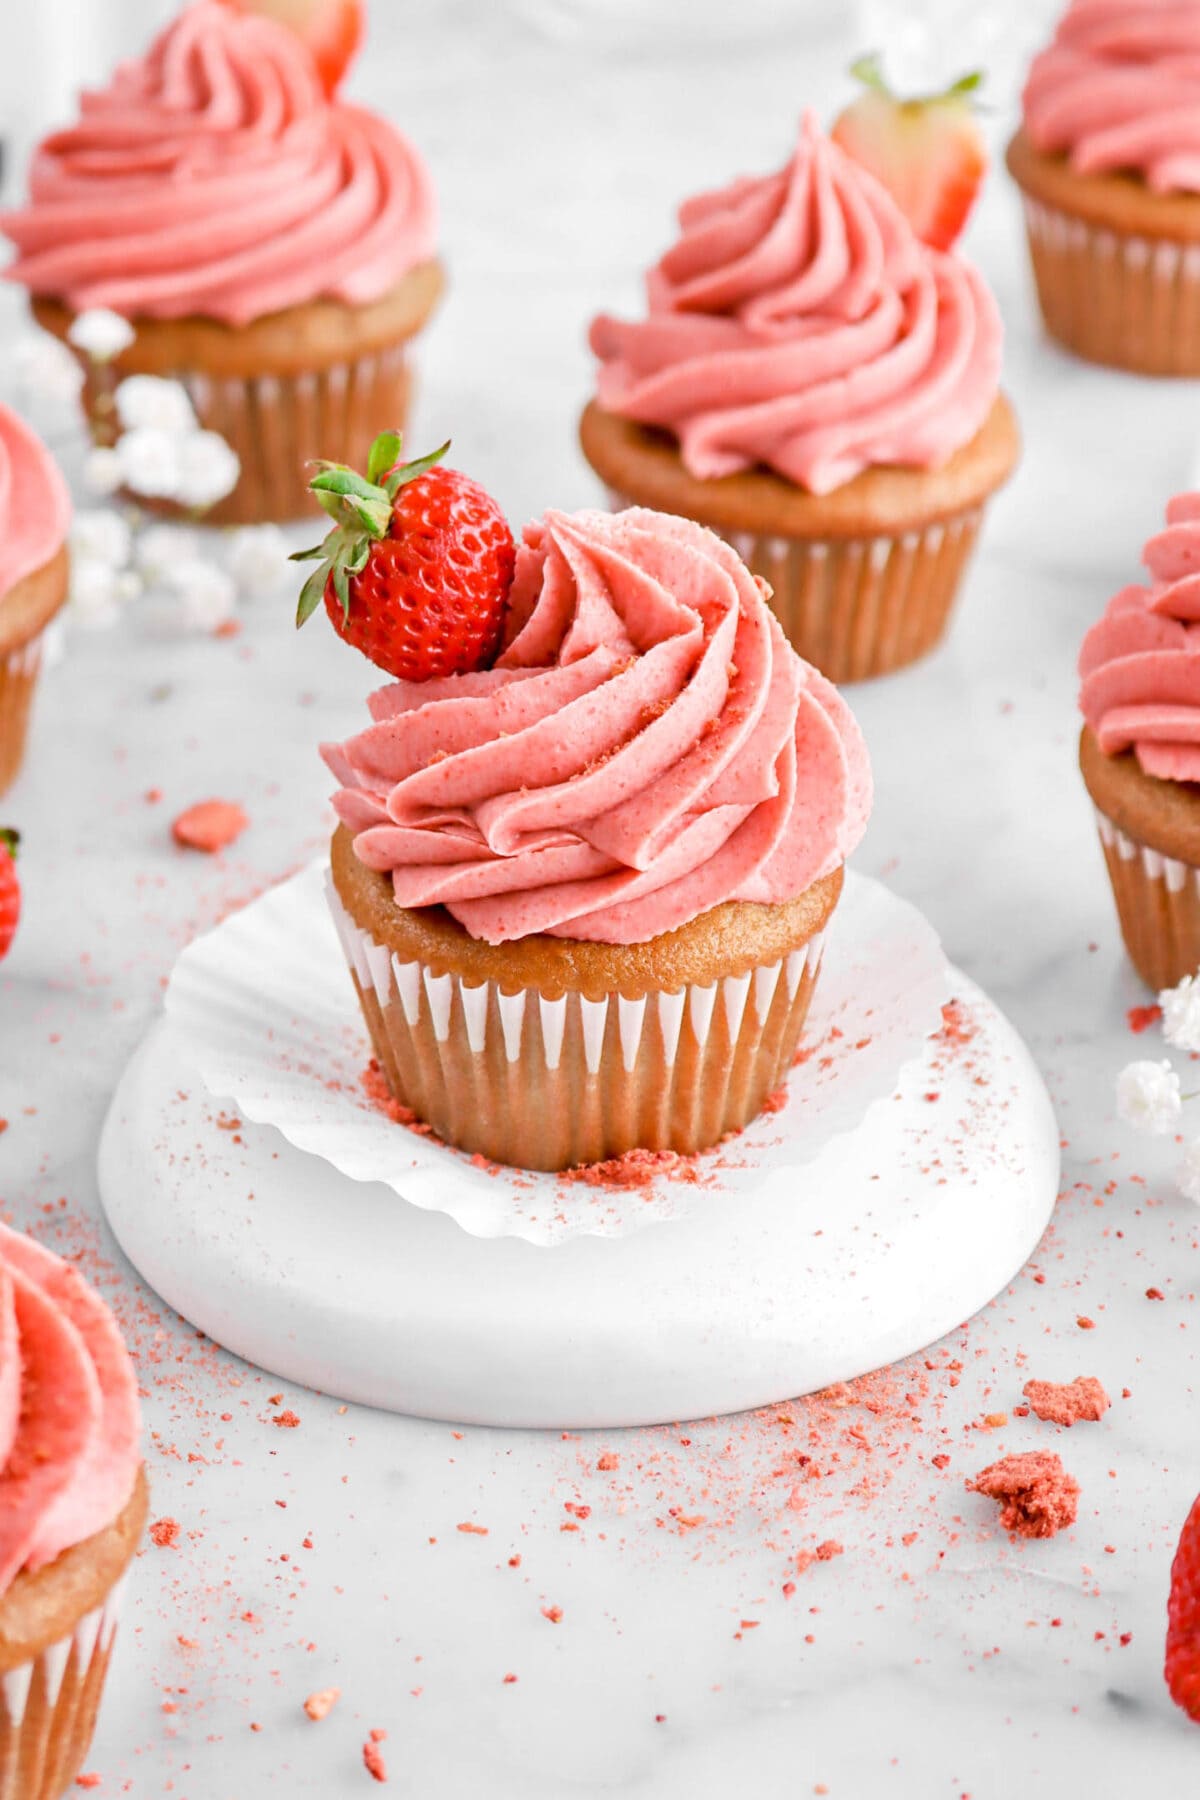 close up of of strawberry cupcake on upside down white plate with more cupcakes behind and freeze-dried strawberry powder around.